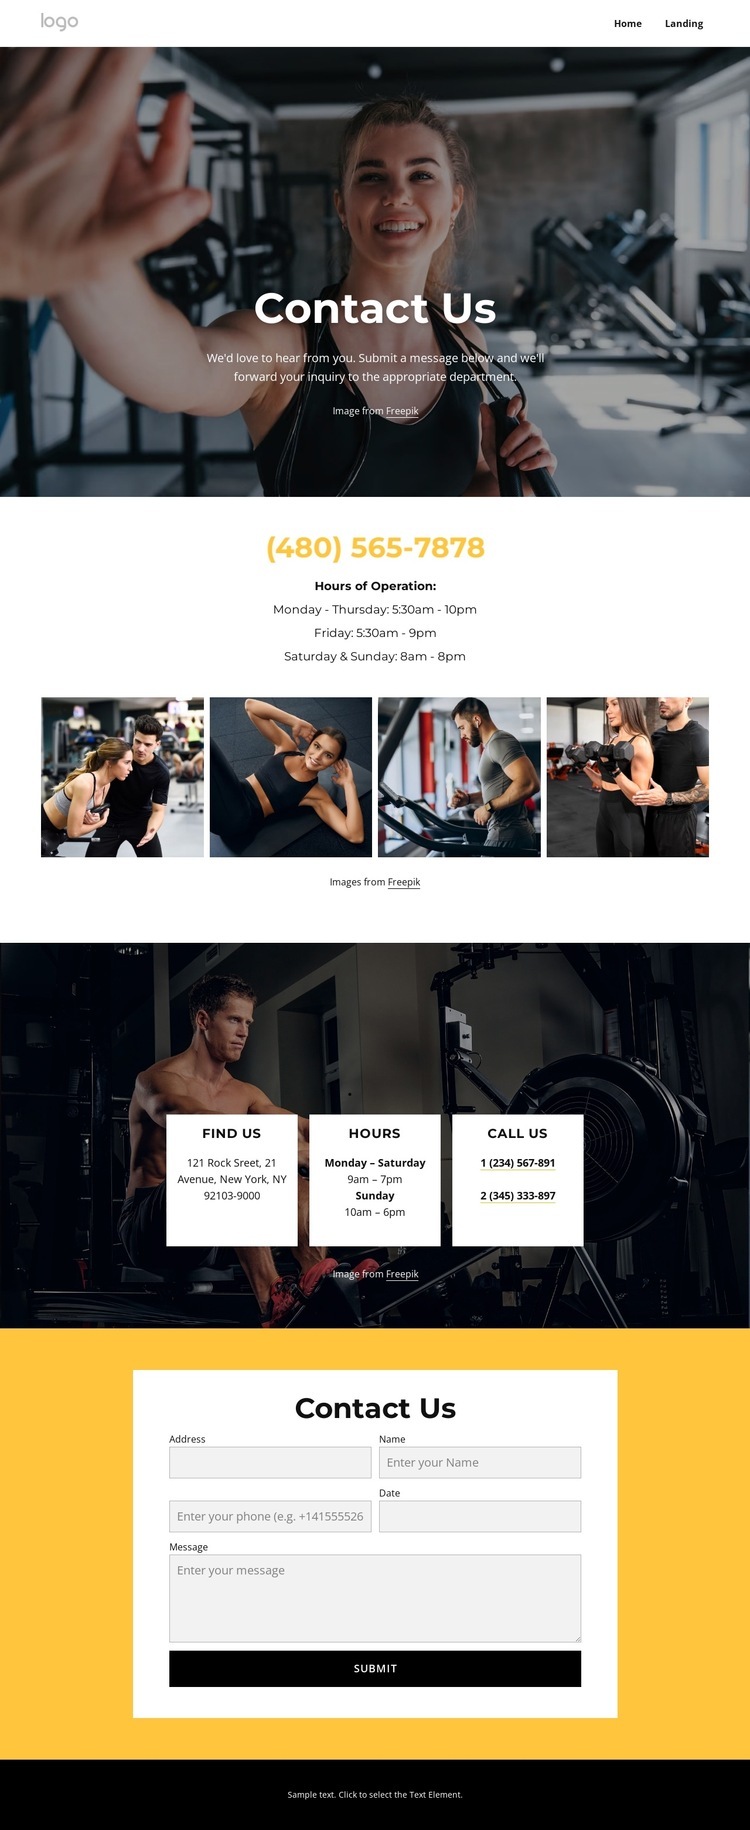 Personal training, group classes Web Page Design